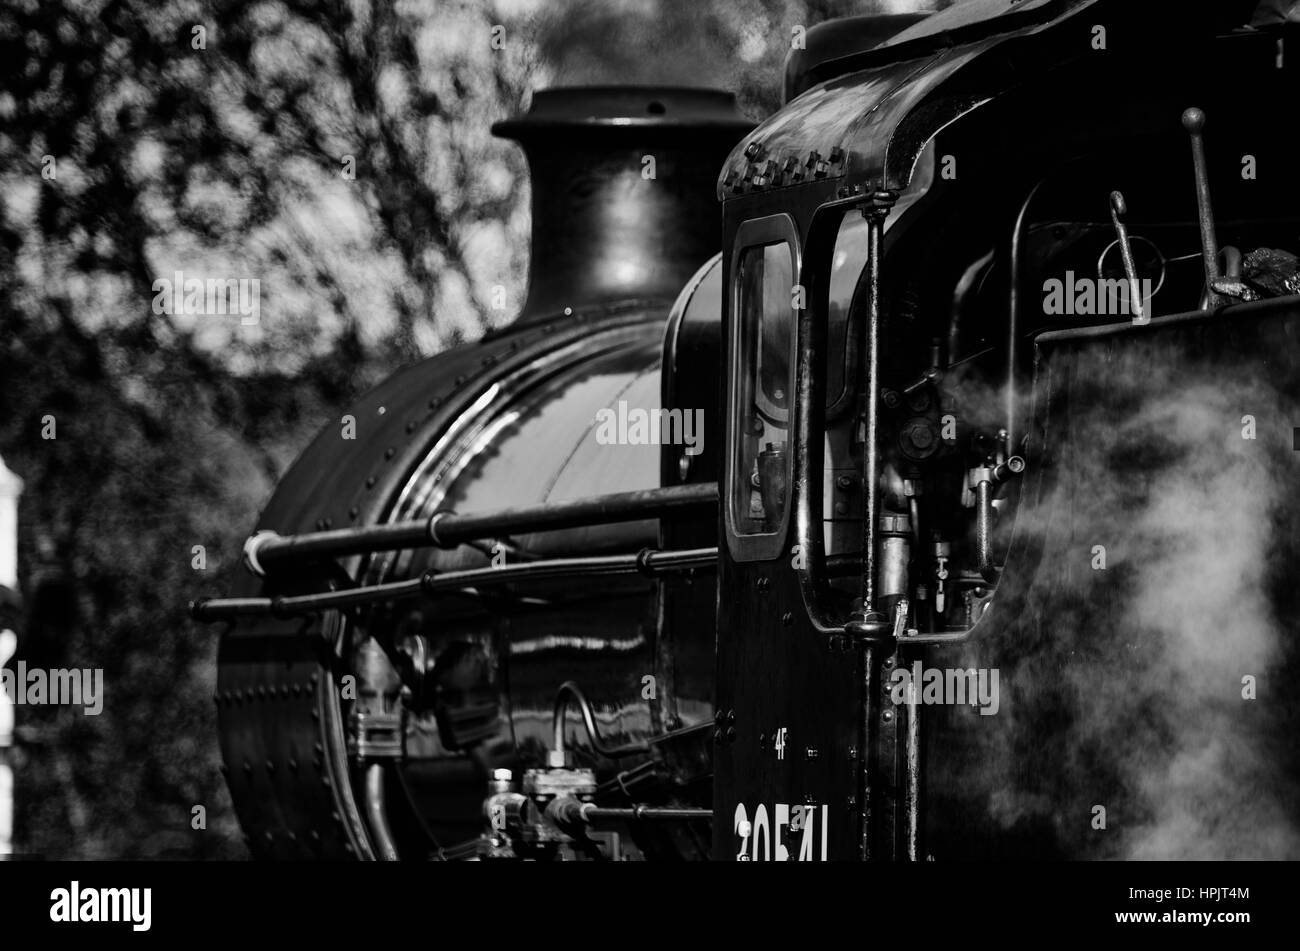 Bluebell Railway Steam Engine Taken at the Bluebell Railway East Sussex, August 2016,  Bluebell Railway is a heritage railway in E.Sussex, The best. Stock Photo